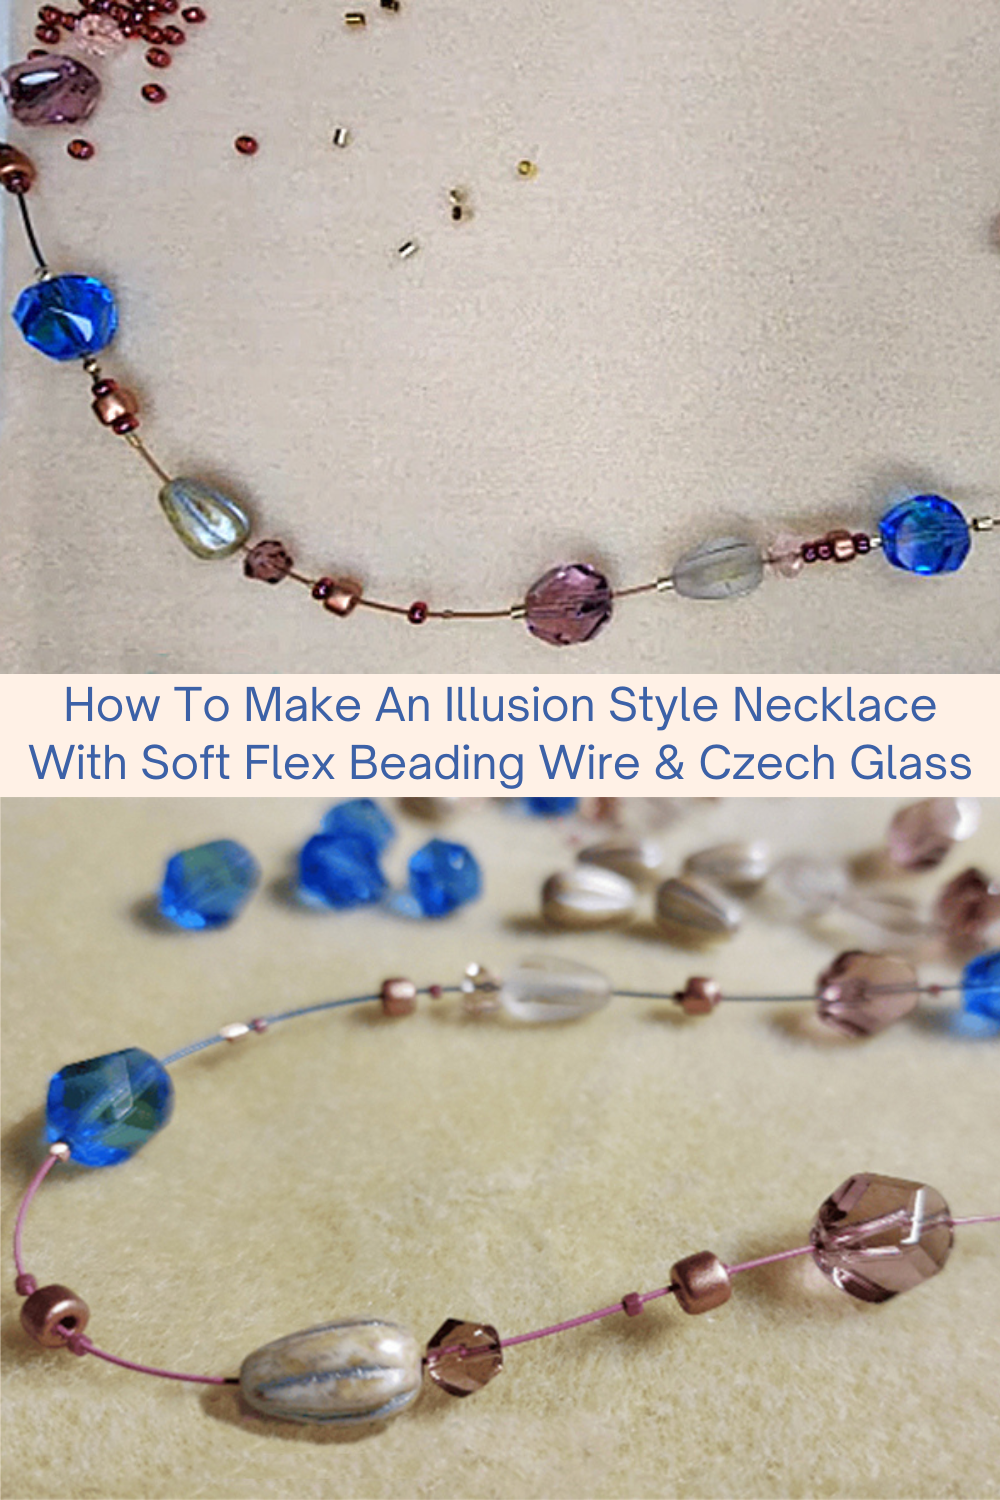 How To Make An Illusion Style Necklace With Soft Flex Beading Wire & Czech Glass Collage